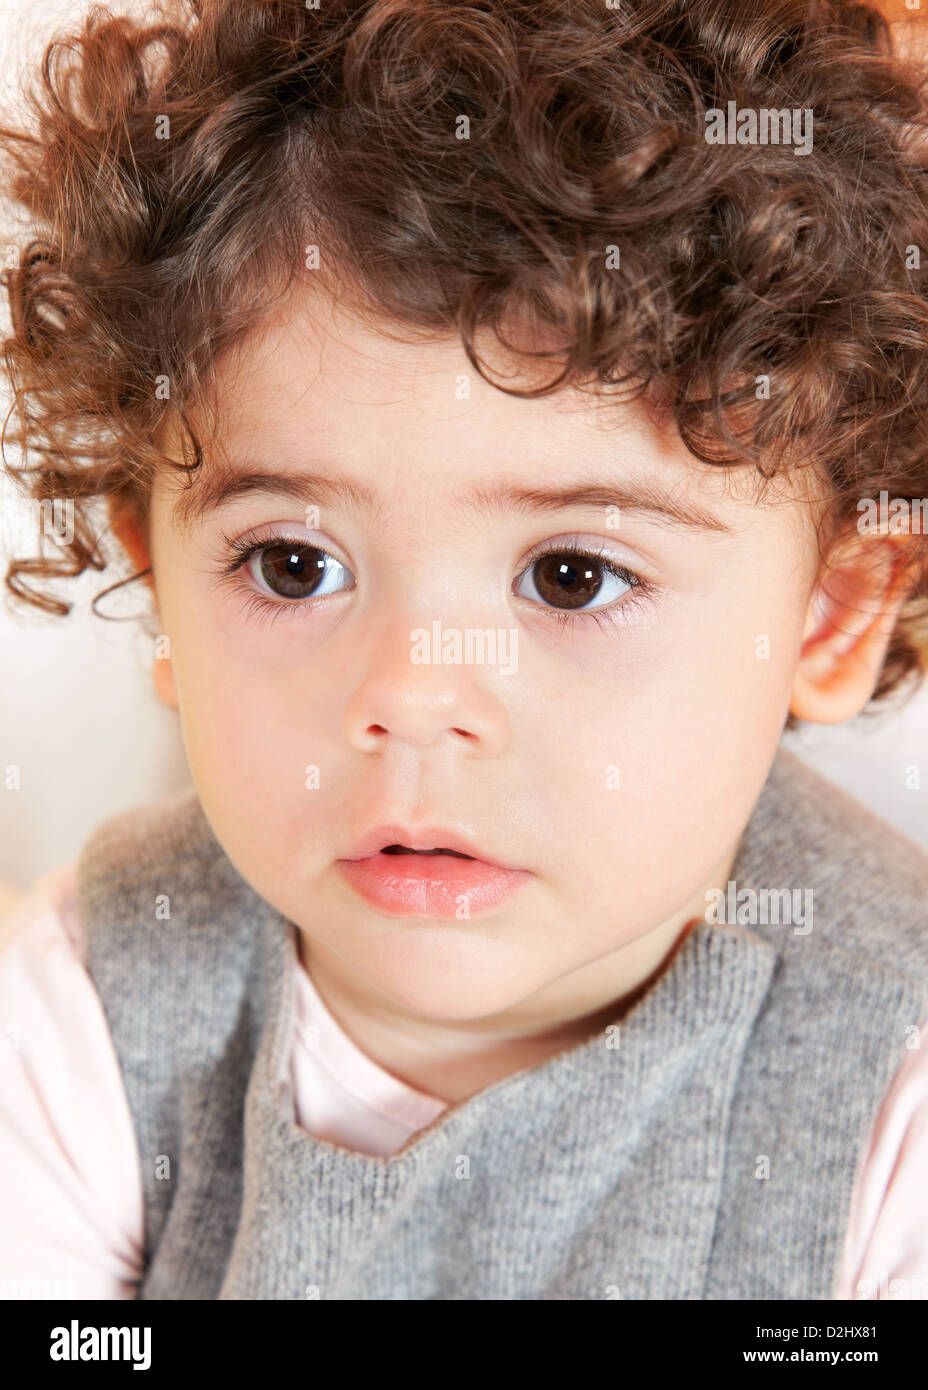 Two year old baby girl with curly hair portrait Stock Photo - Alamy